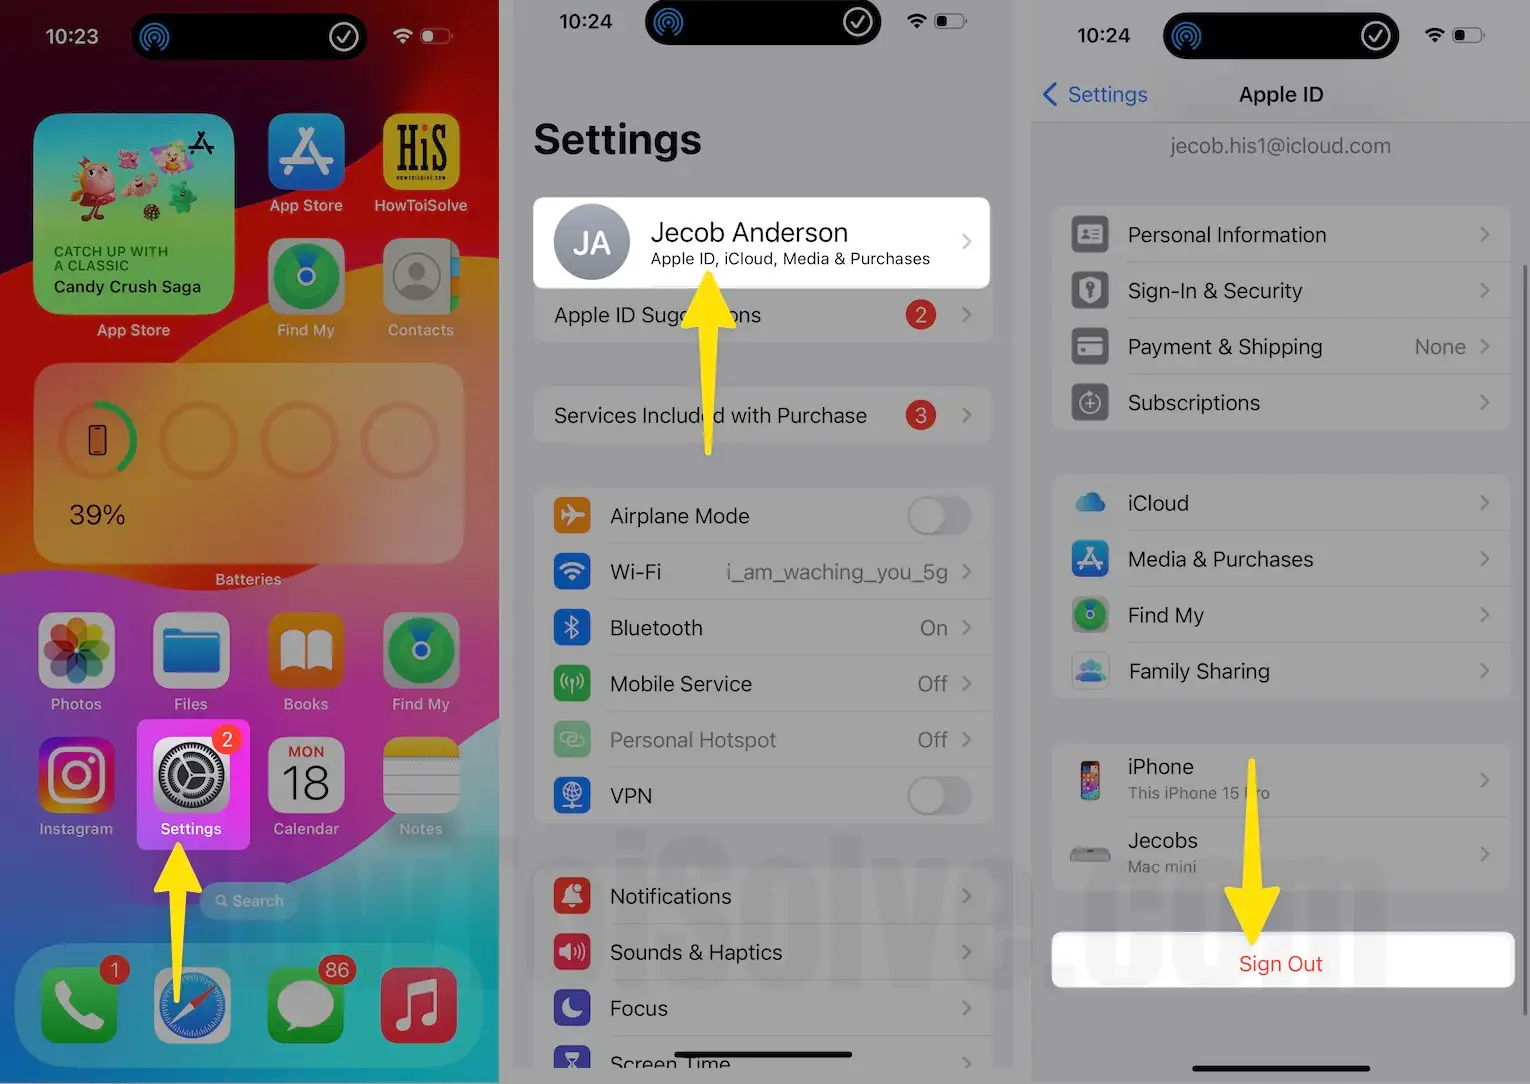 Launch the settings app tap on apple id profile name then select sign out on iPhone